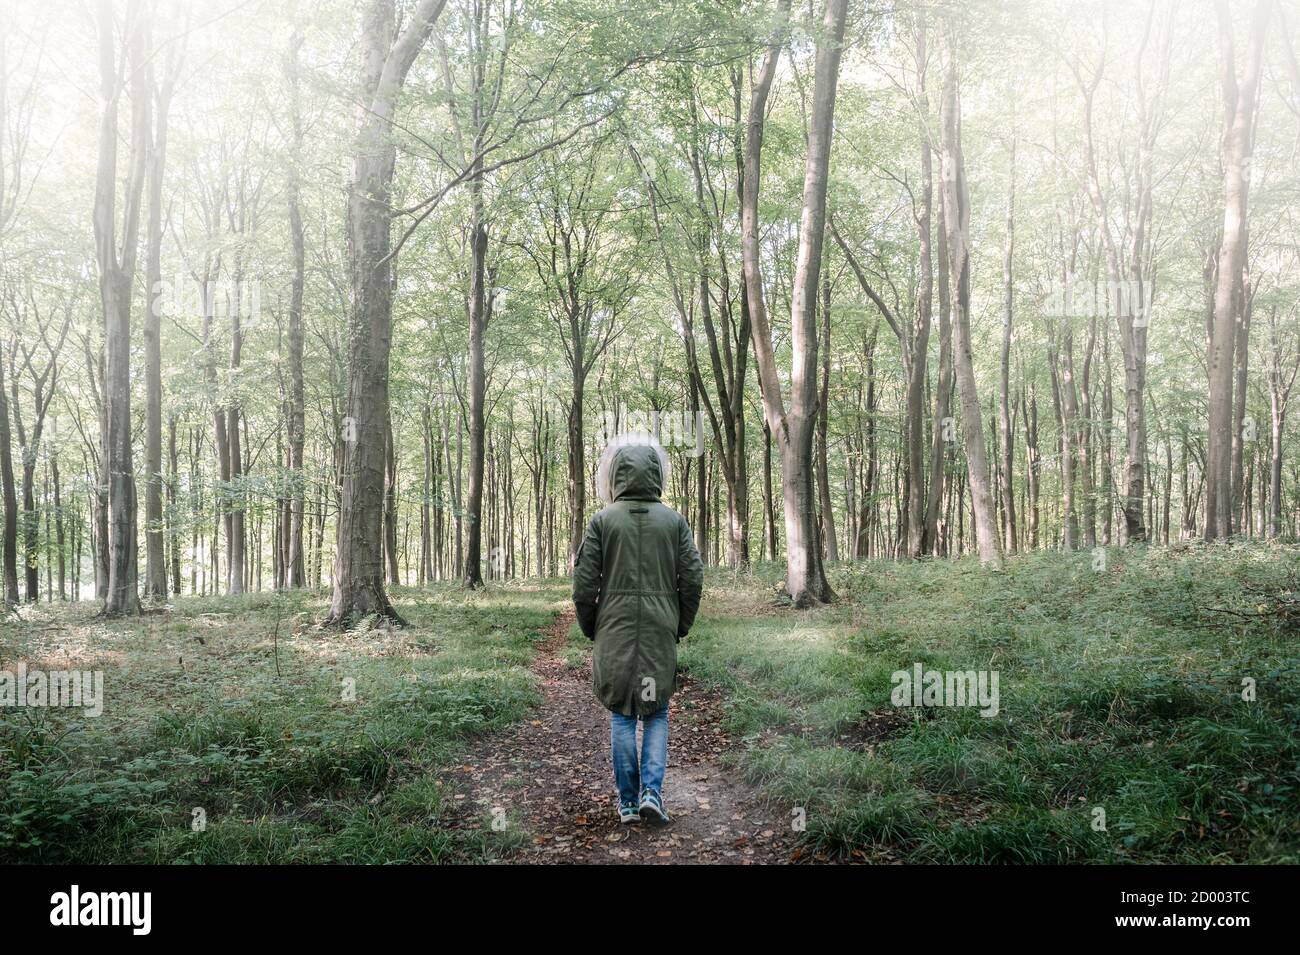 Woman walking through a forest with mist and fog, wearing a Parka coat, rear view. Stock Photo